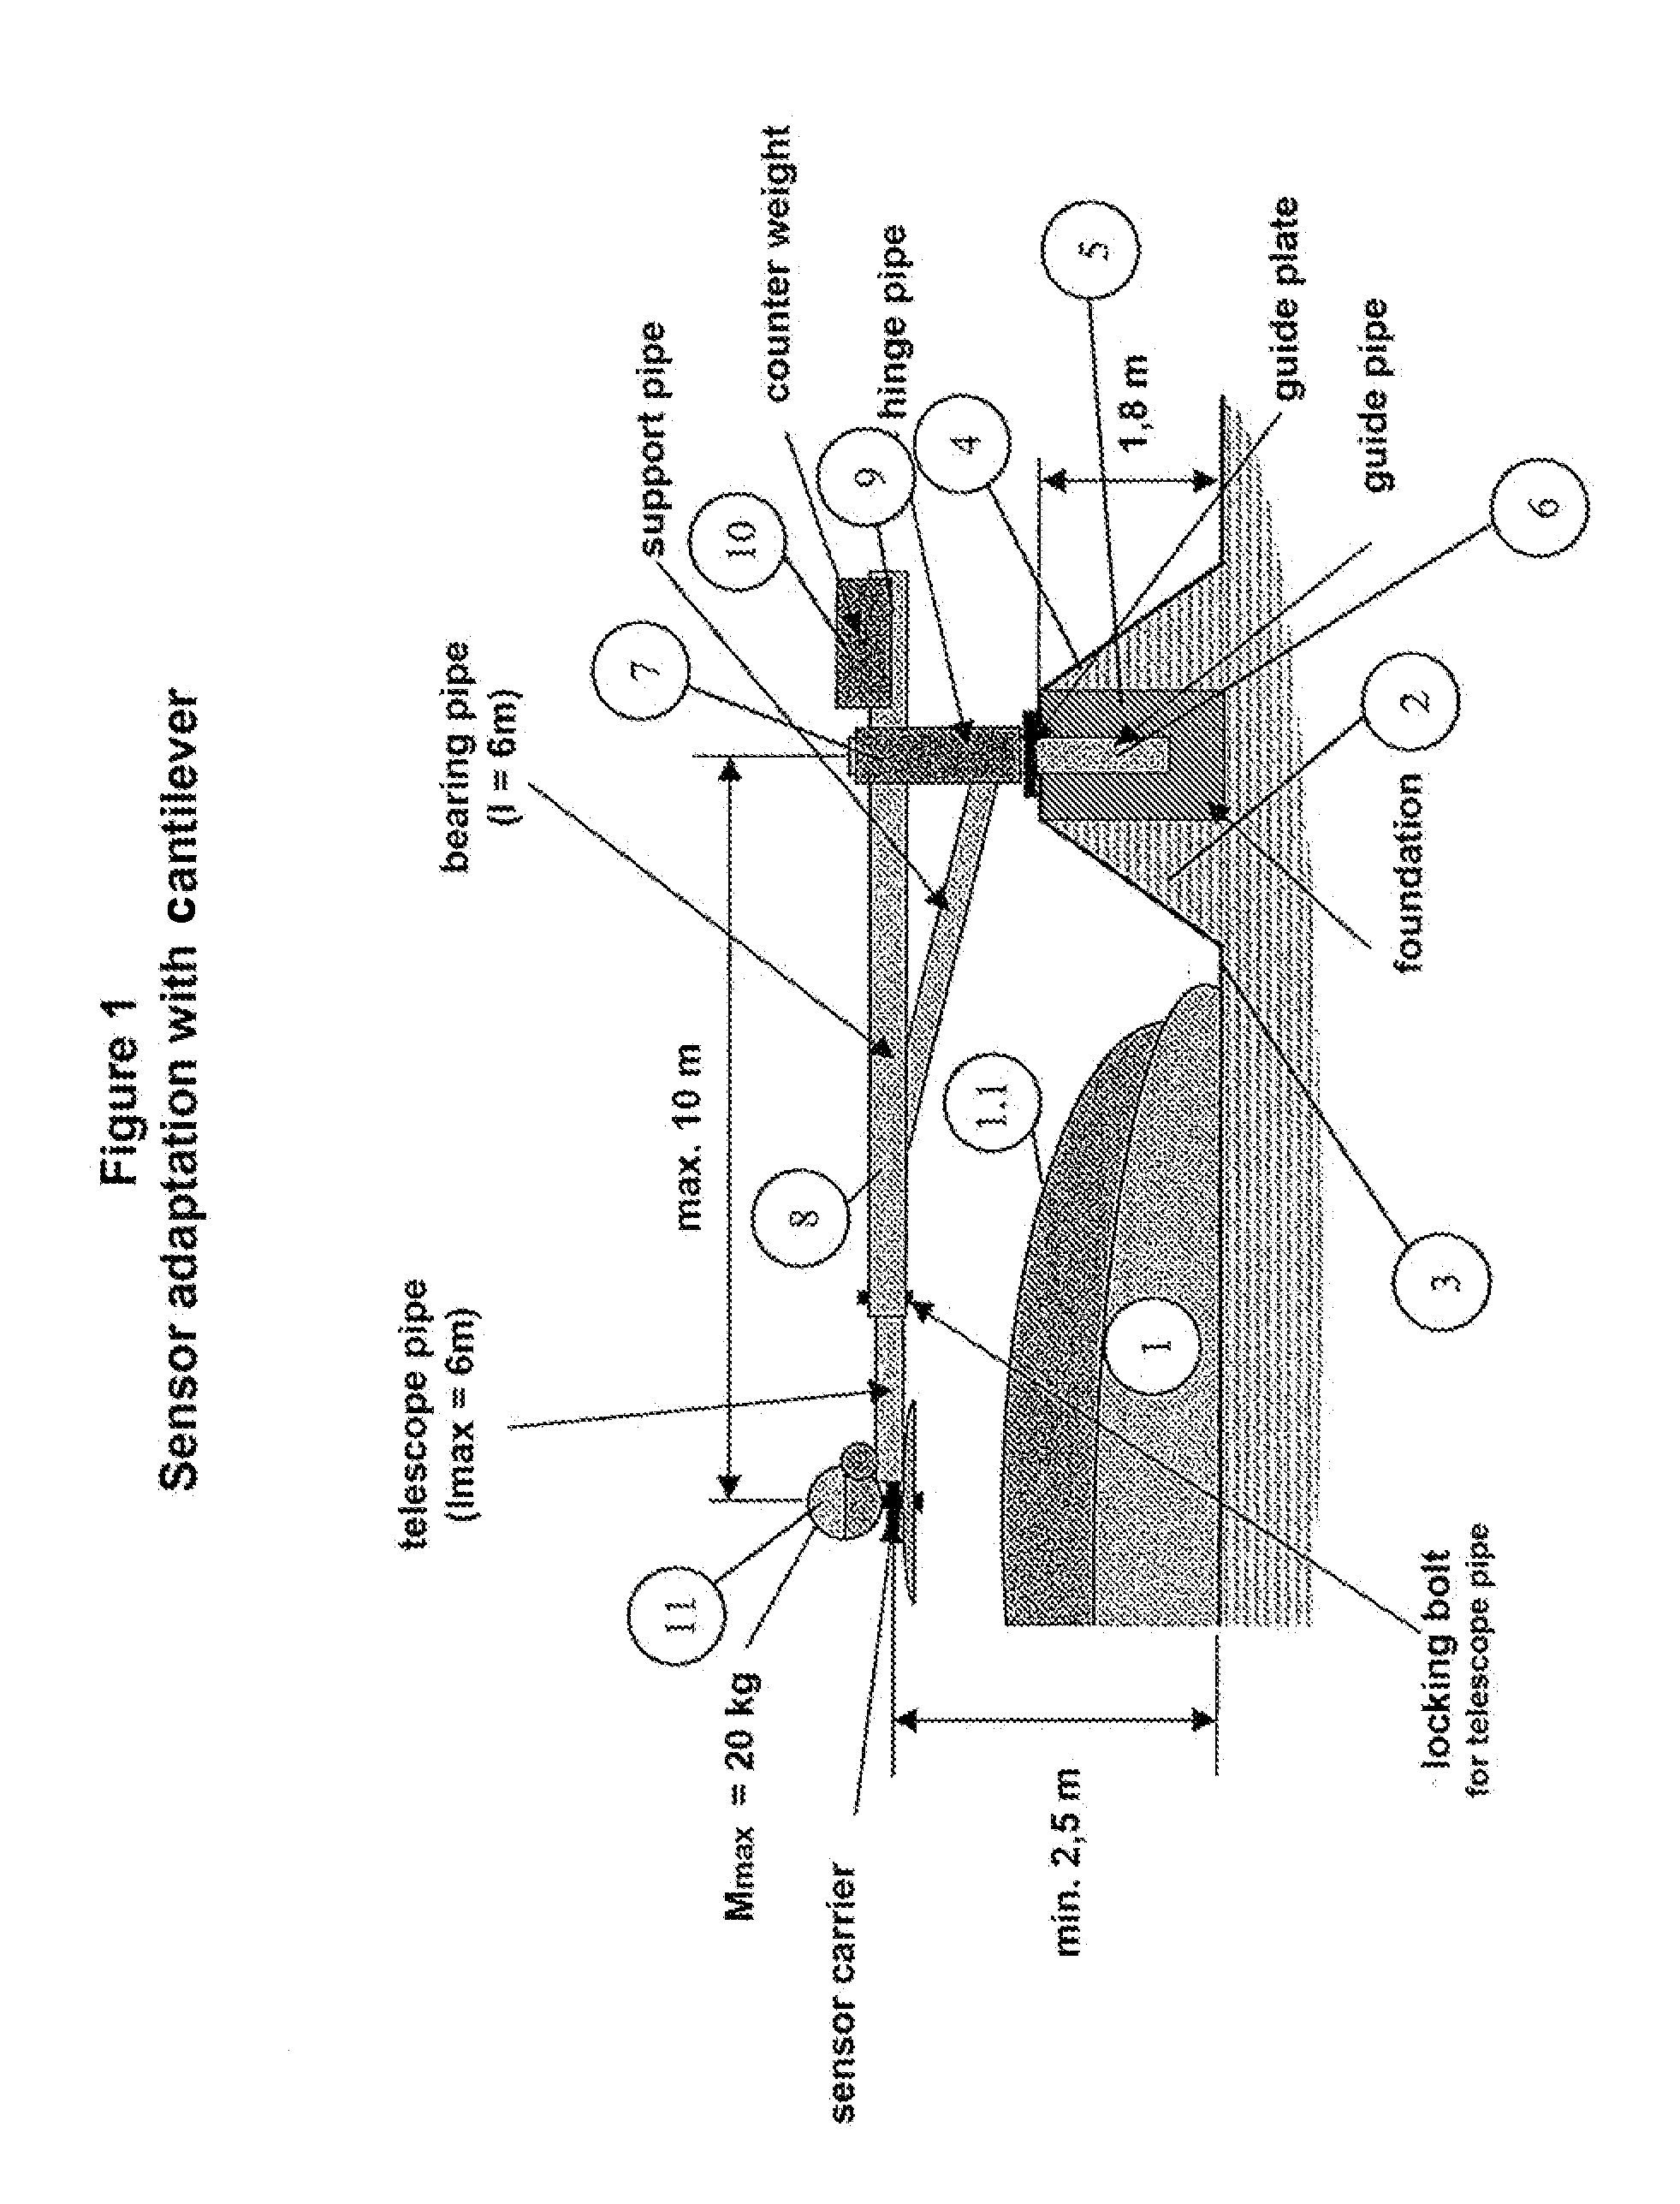 Apparatus and method for level measuring in a tank with flexible walls